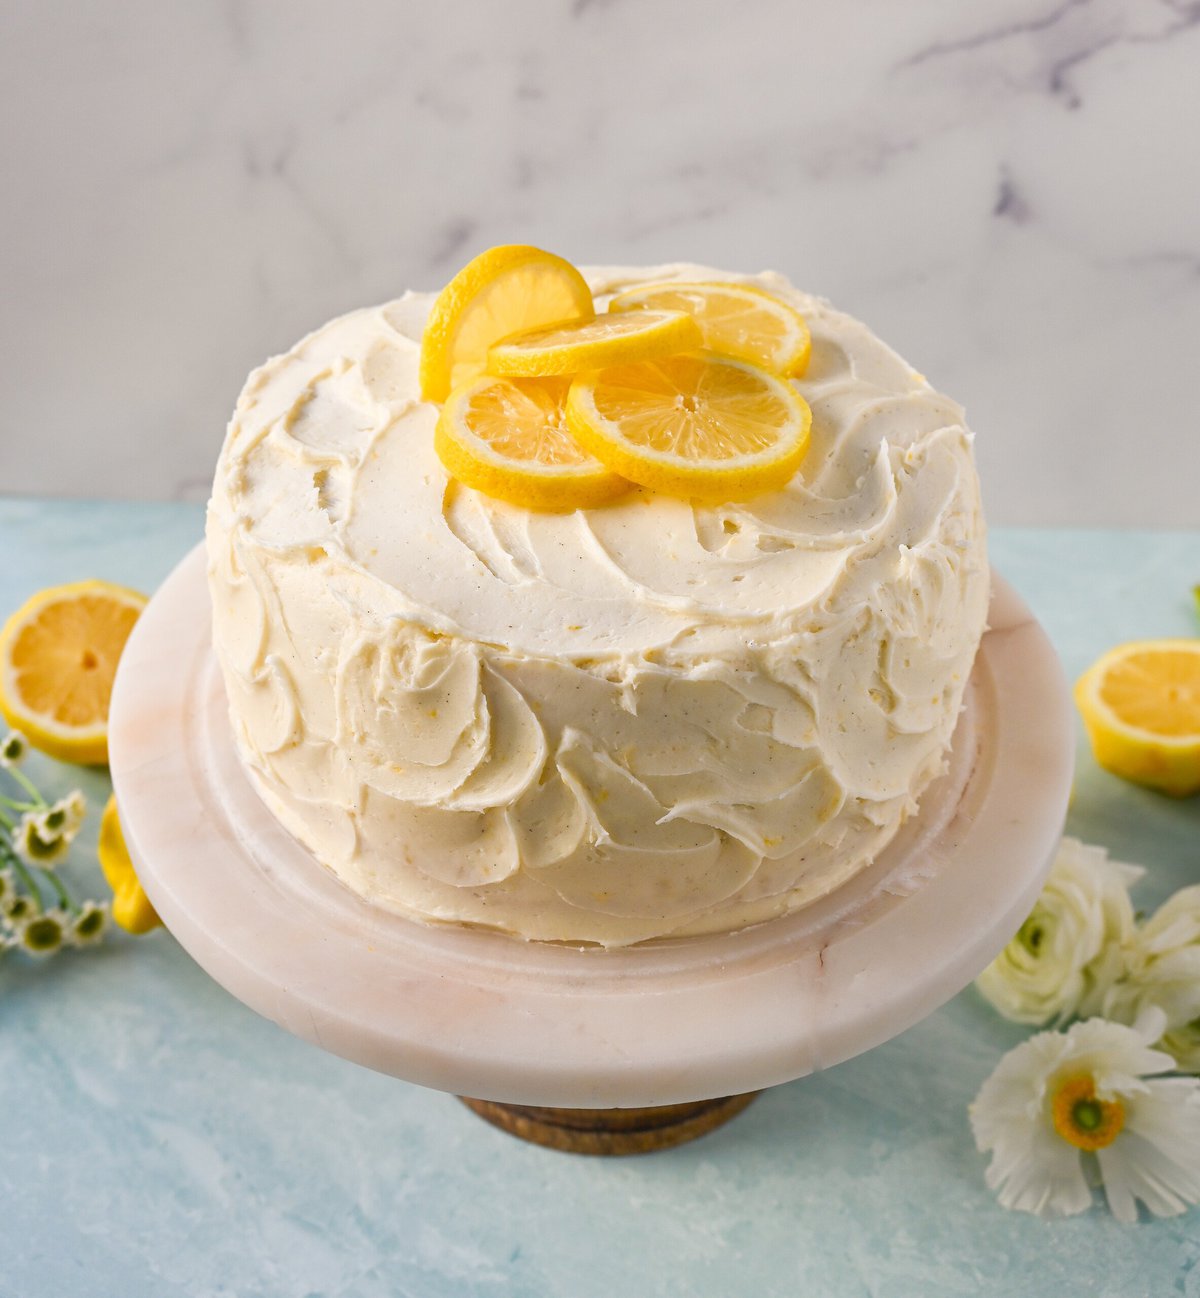 The Best Lemon Cake Recipe is moist, light, and fluffy made with fresh lemon juice and layered with lemon curd and lemon cream cheese frosting. This is the lemon cake of your dreams!